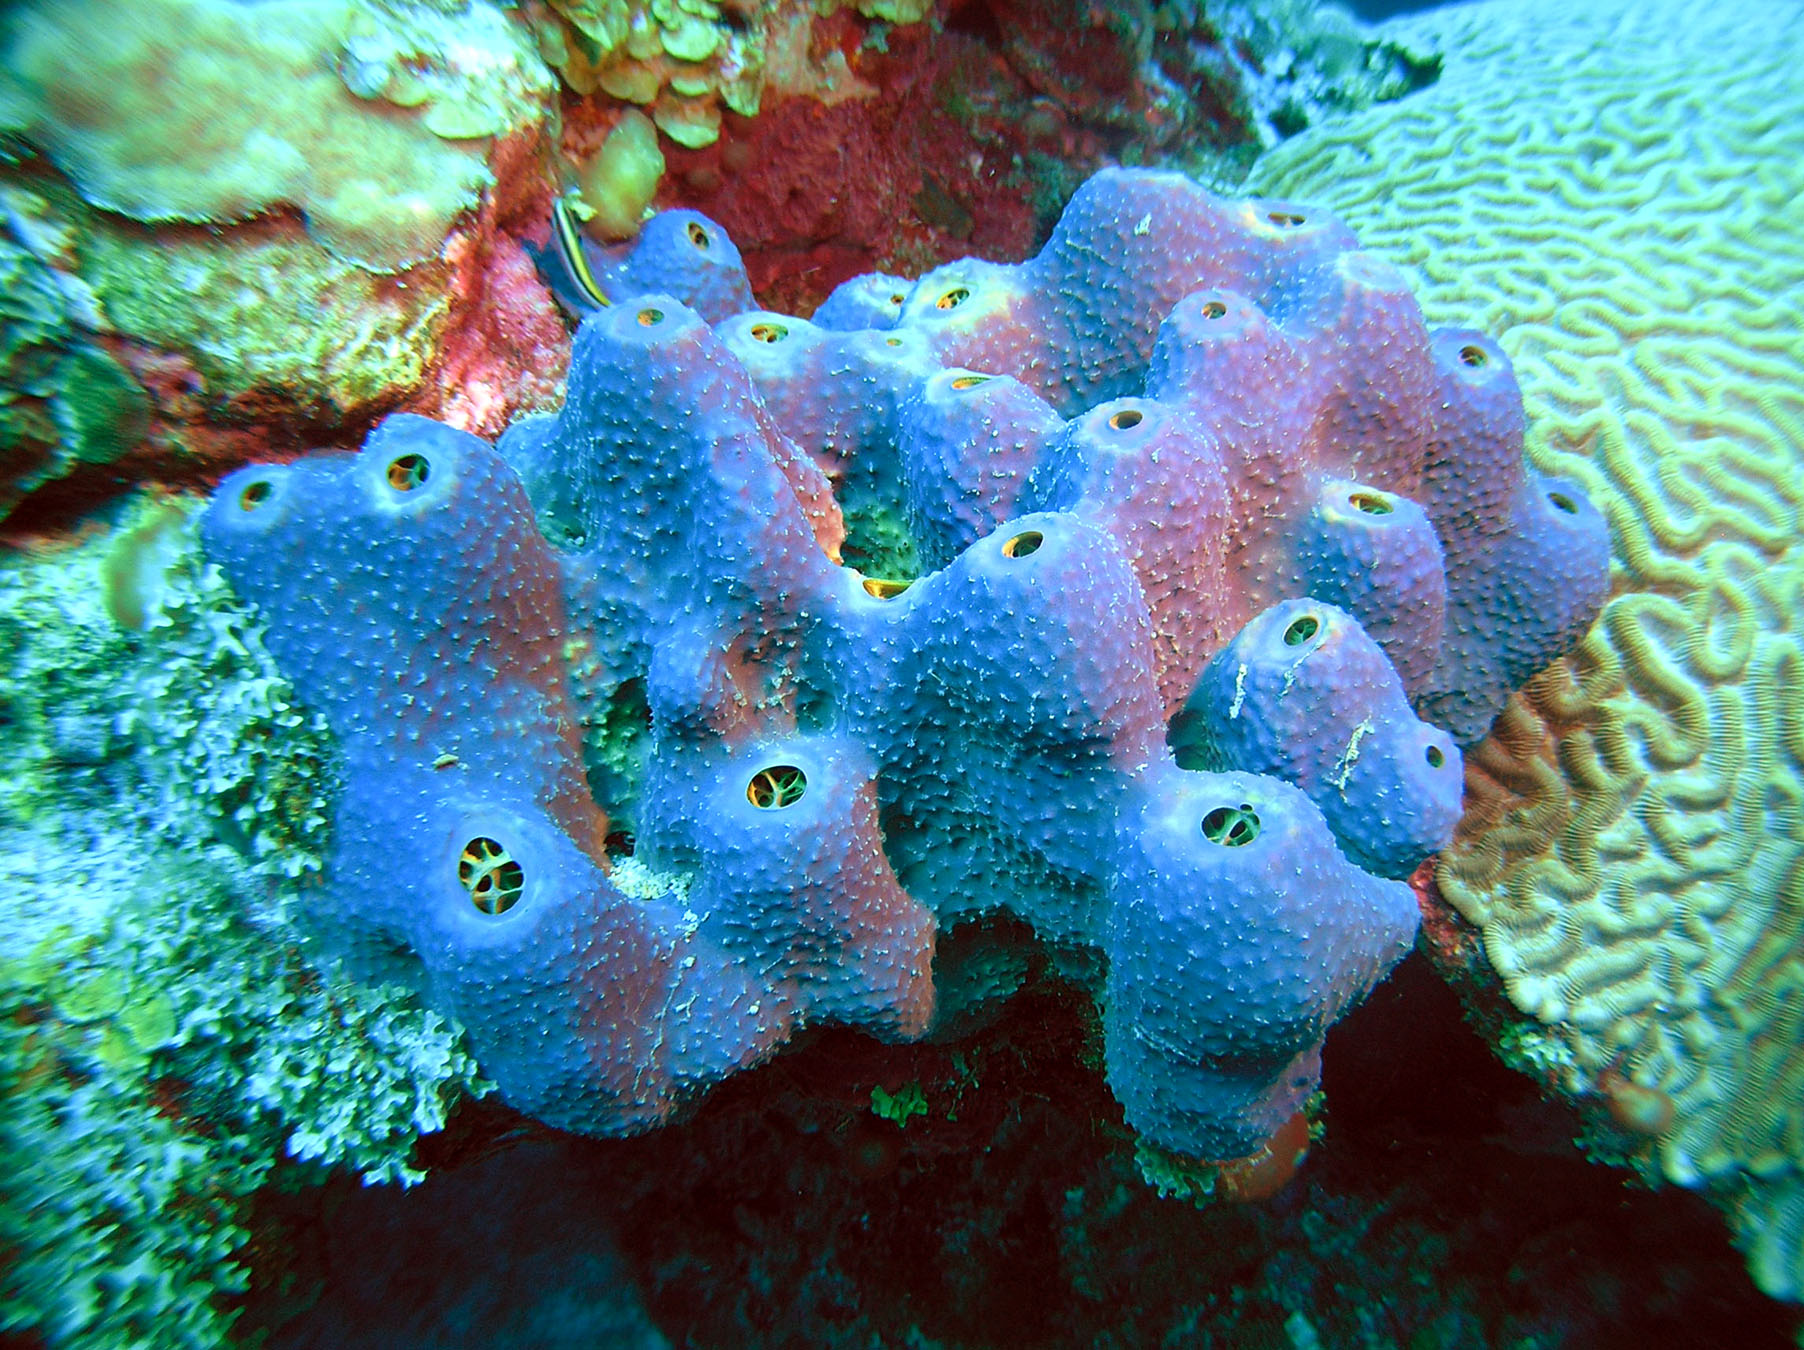 Why do sea sponges release toxins?